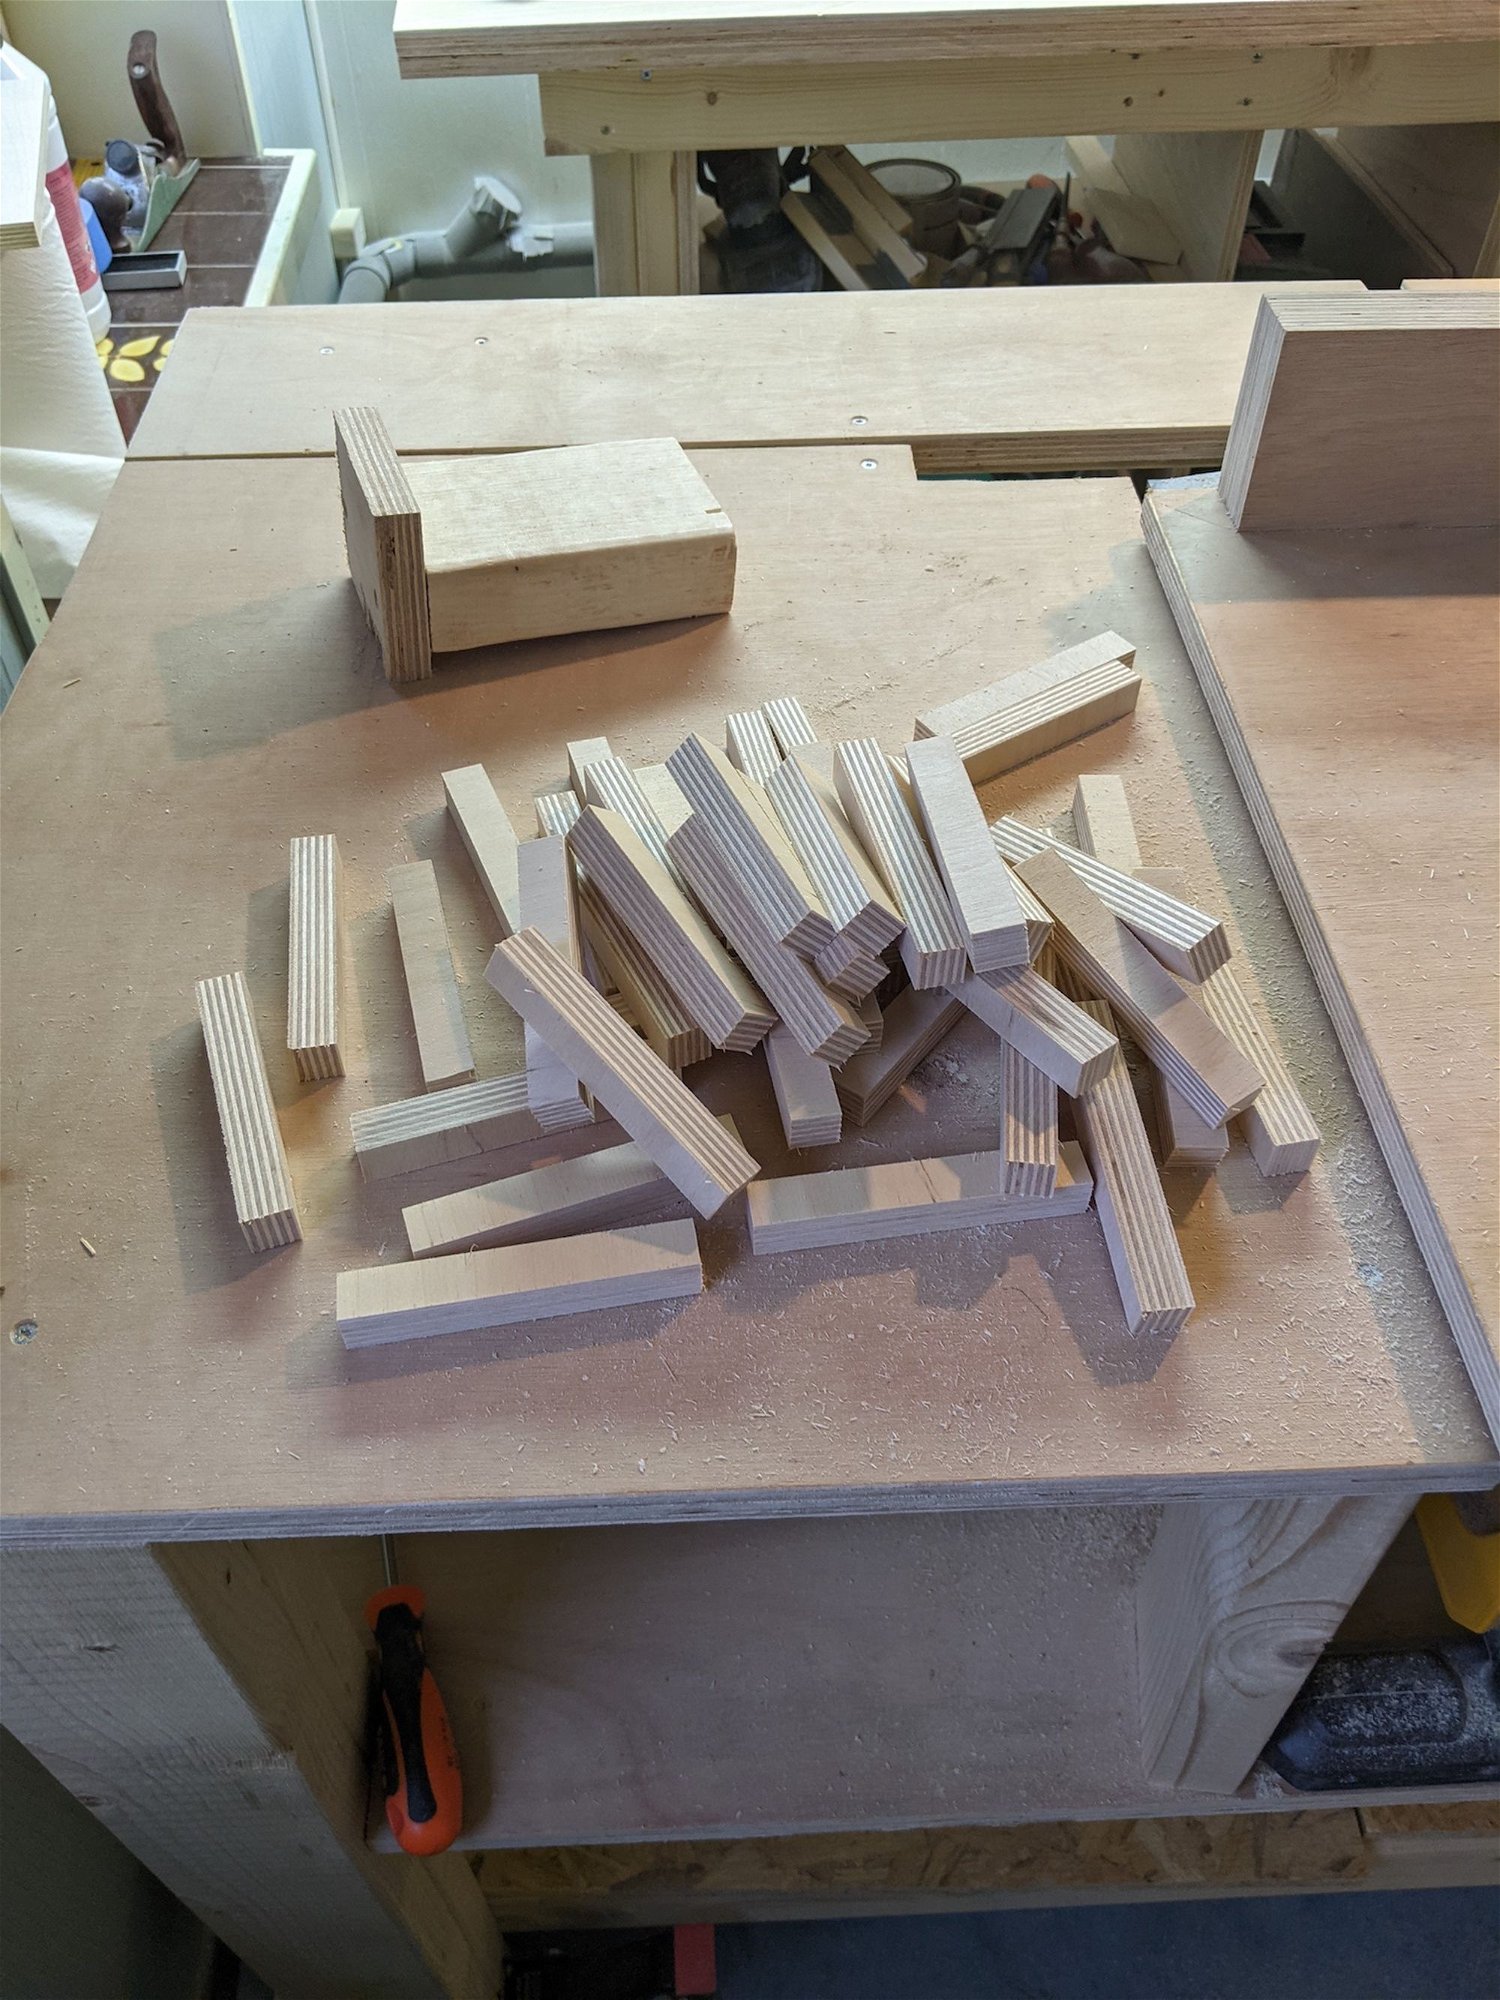 Here is started on the panels for the doors. I've been inspired by a lot of patterned plywood works and i love geometric designs and shapes so i decided to go ahead and create 2 doors to fit the dresser. Here i've cut pieces of plywood to ±10cm strips with a width of around 16mm which would match the thickness of the plywood(after sanding).